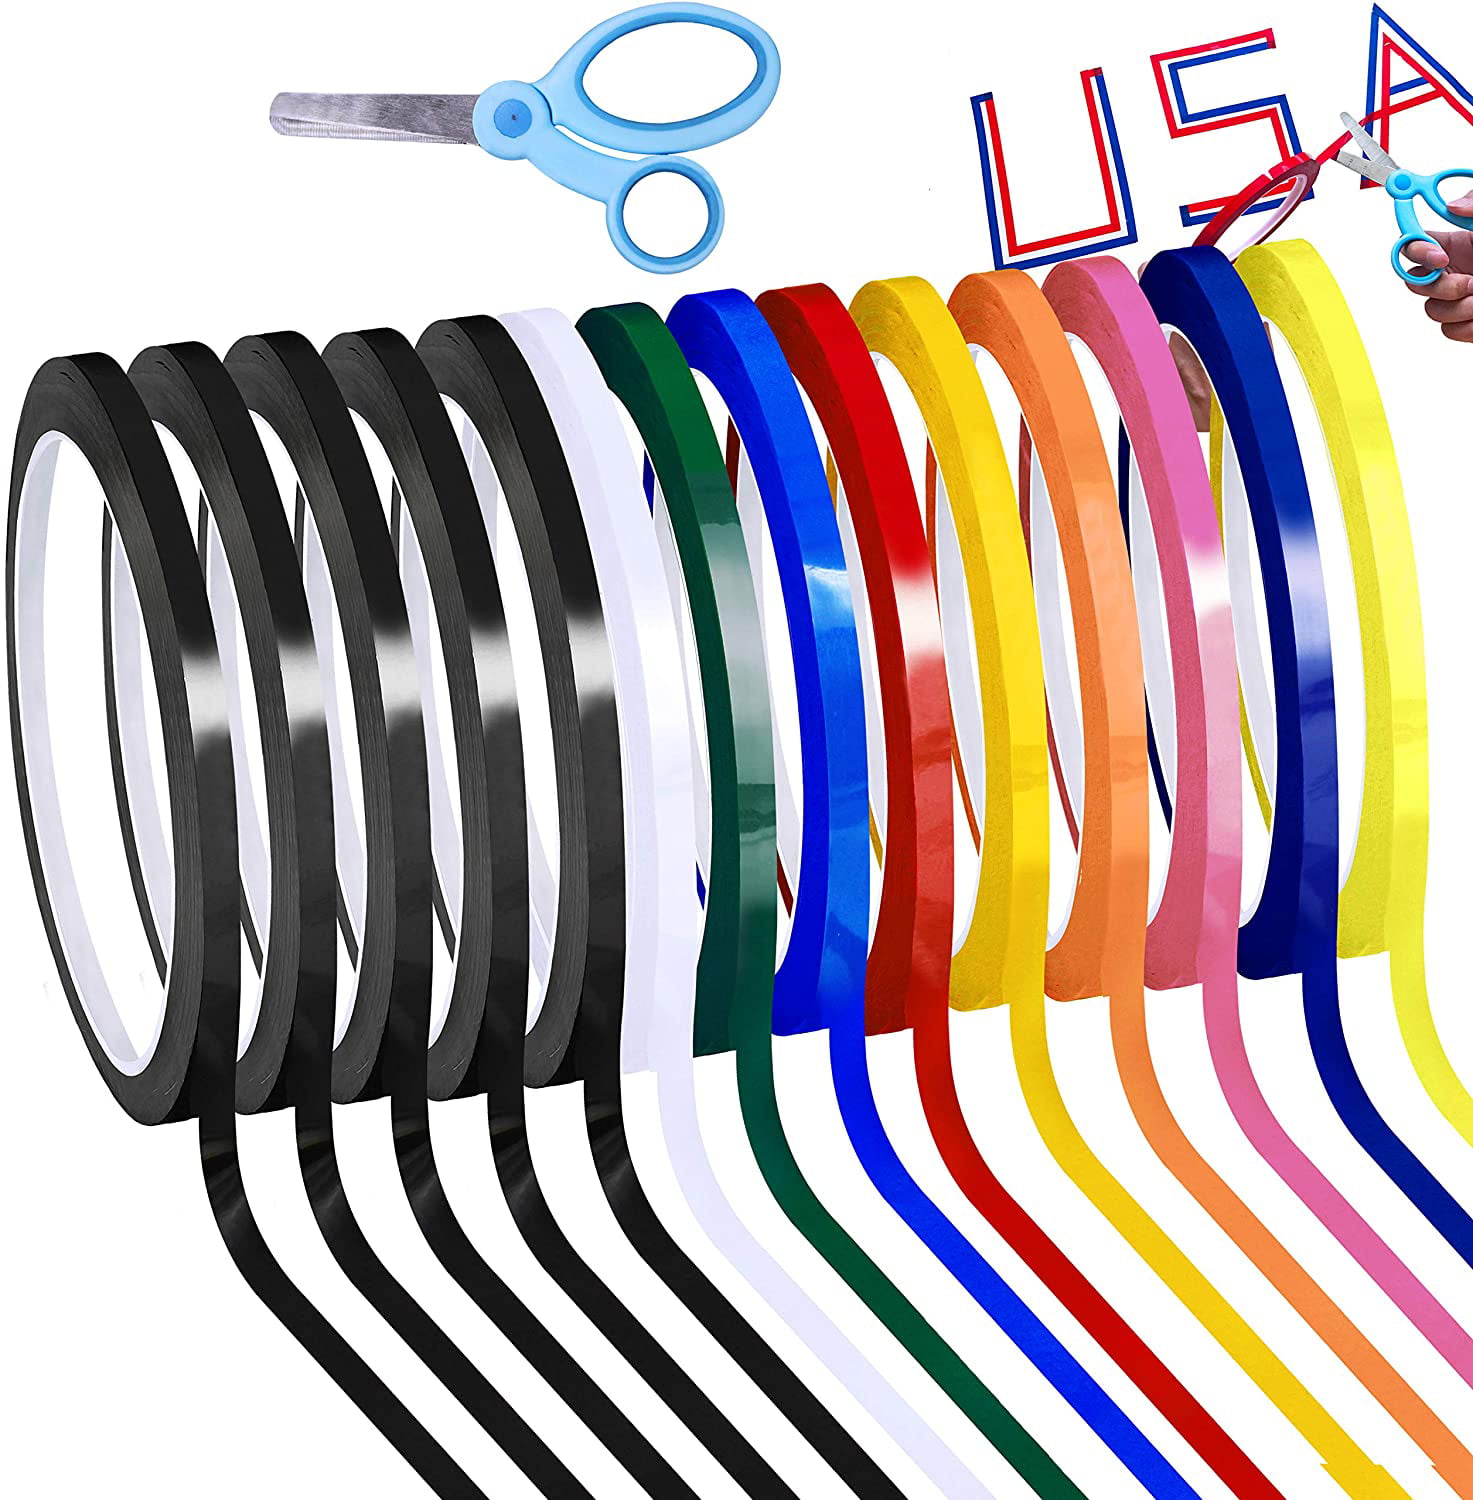 13M Self Adhesive Tape Strong Sticky Chart Grid Whiteboard Wall Decoration Tape 